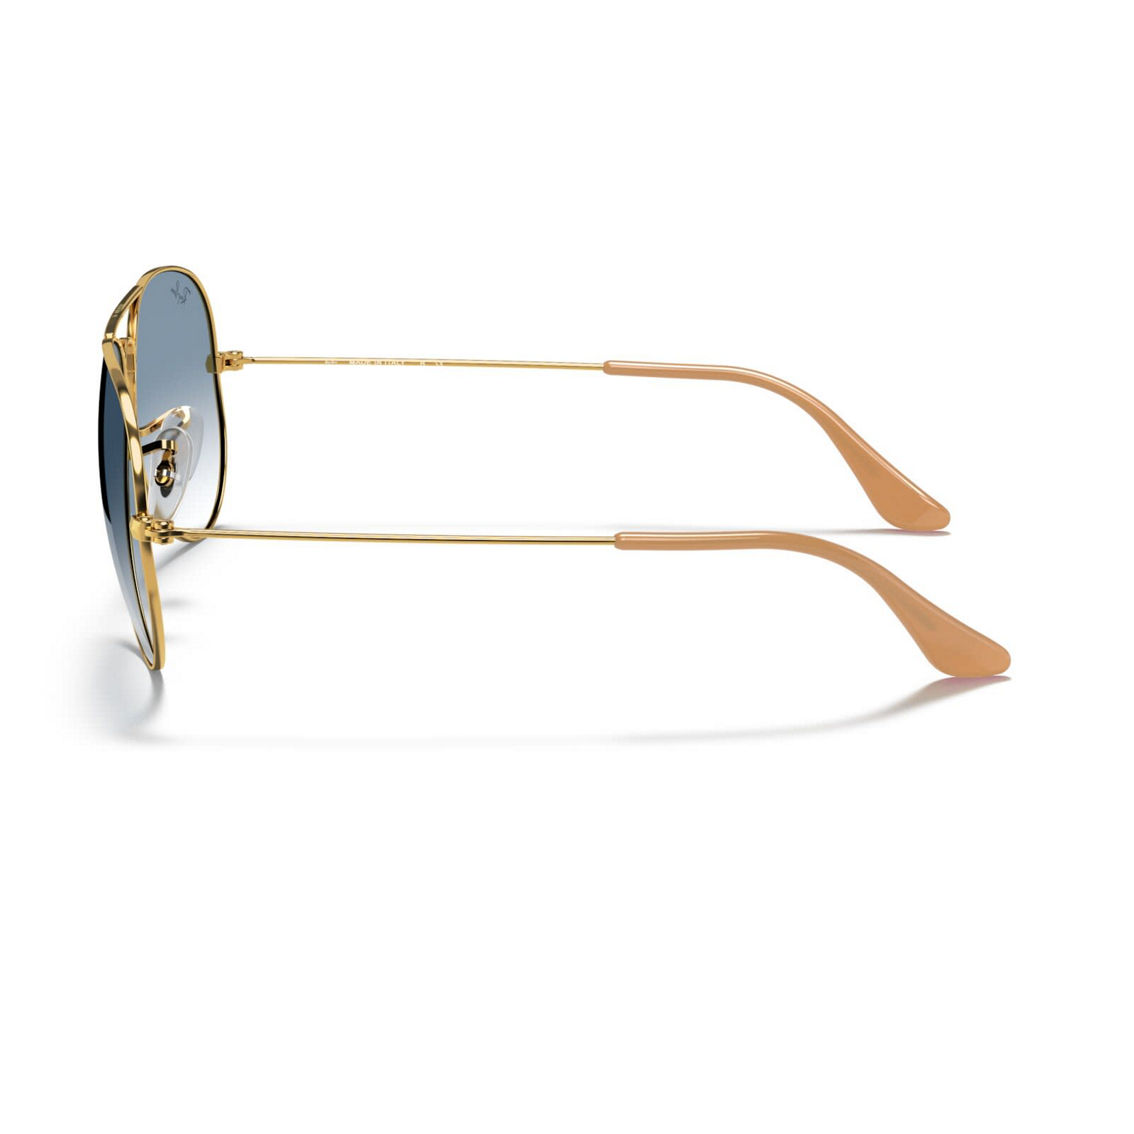 Ray-Ban RB3025 Aviator Gradient - Image 3 of 5